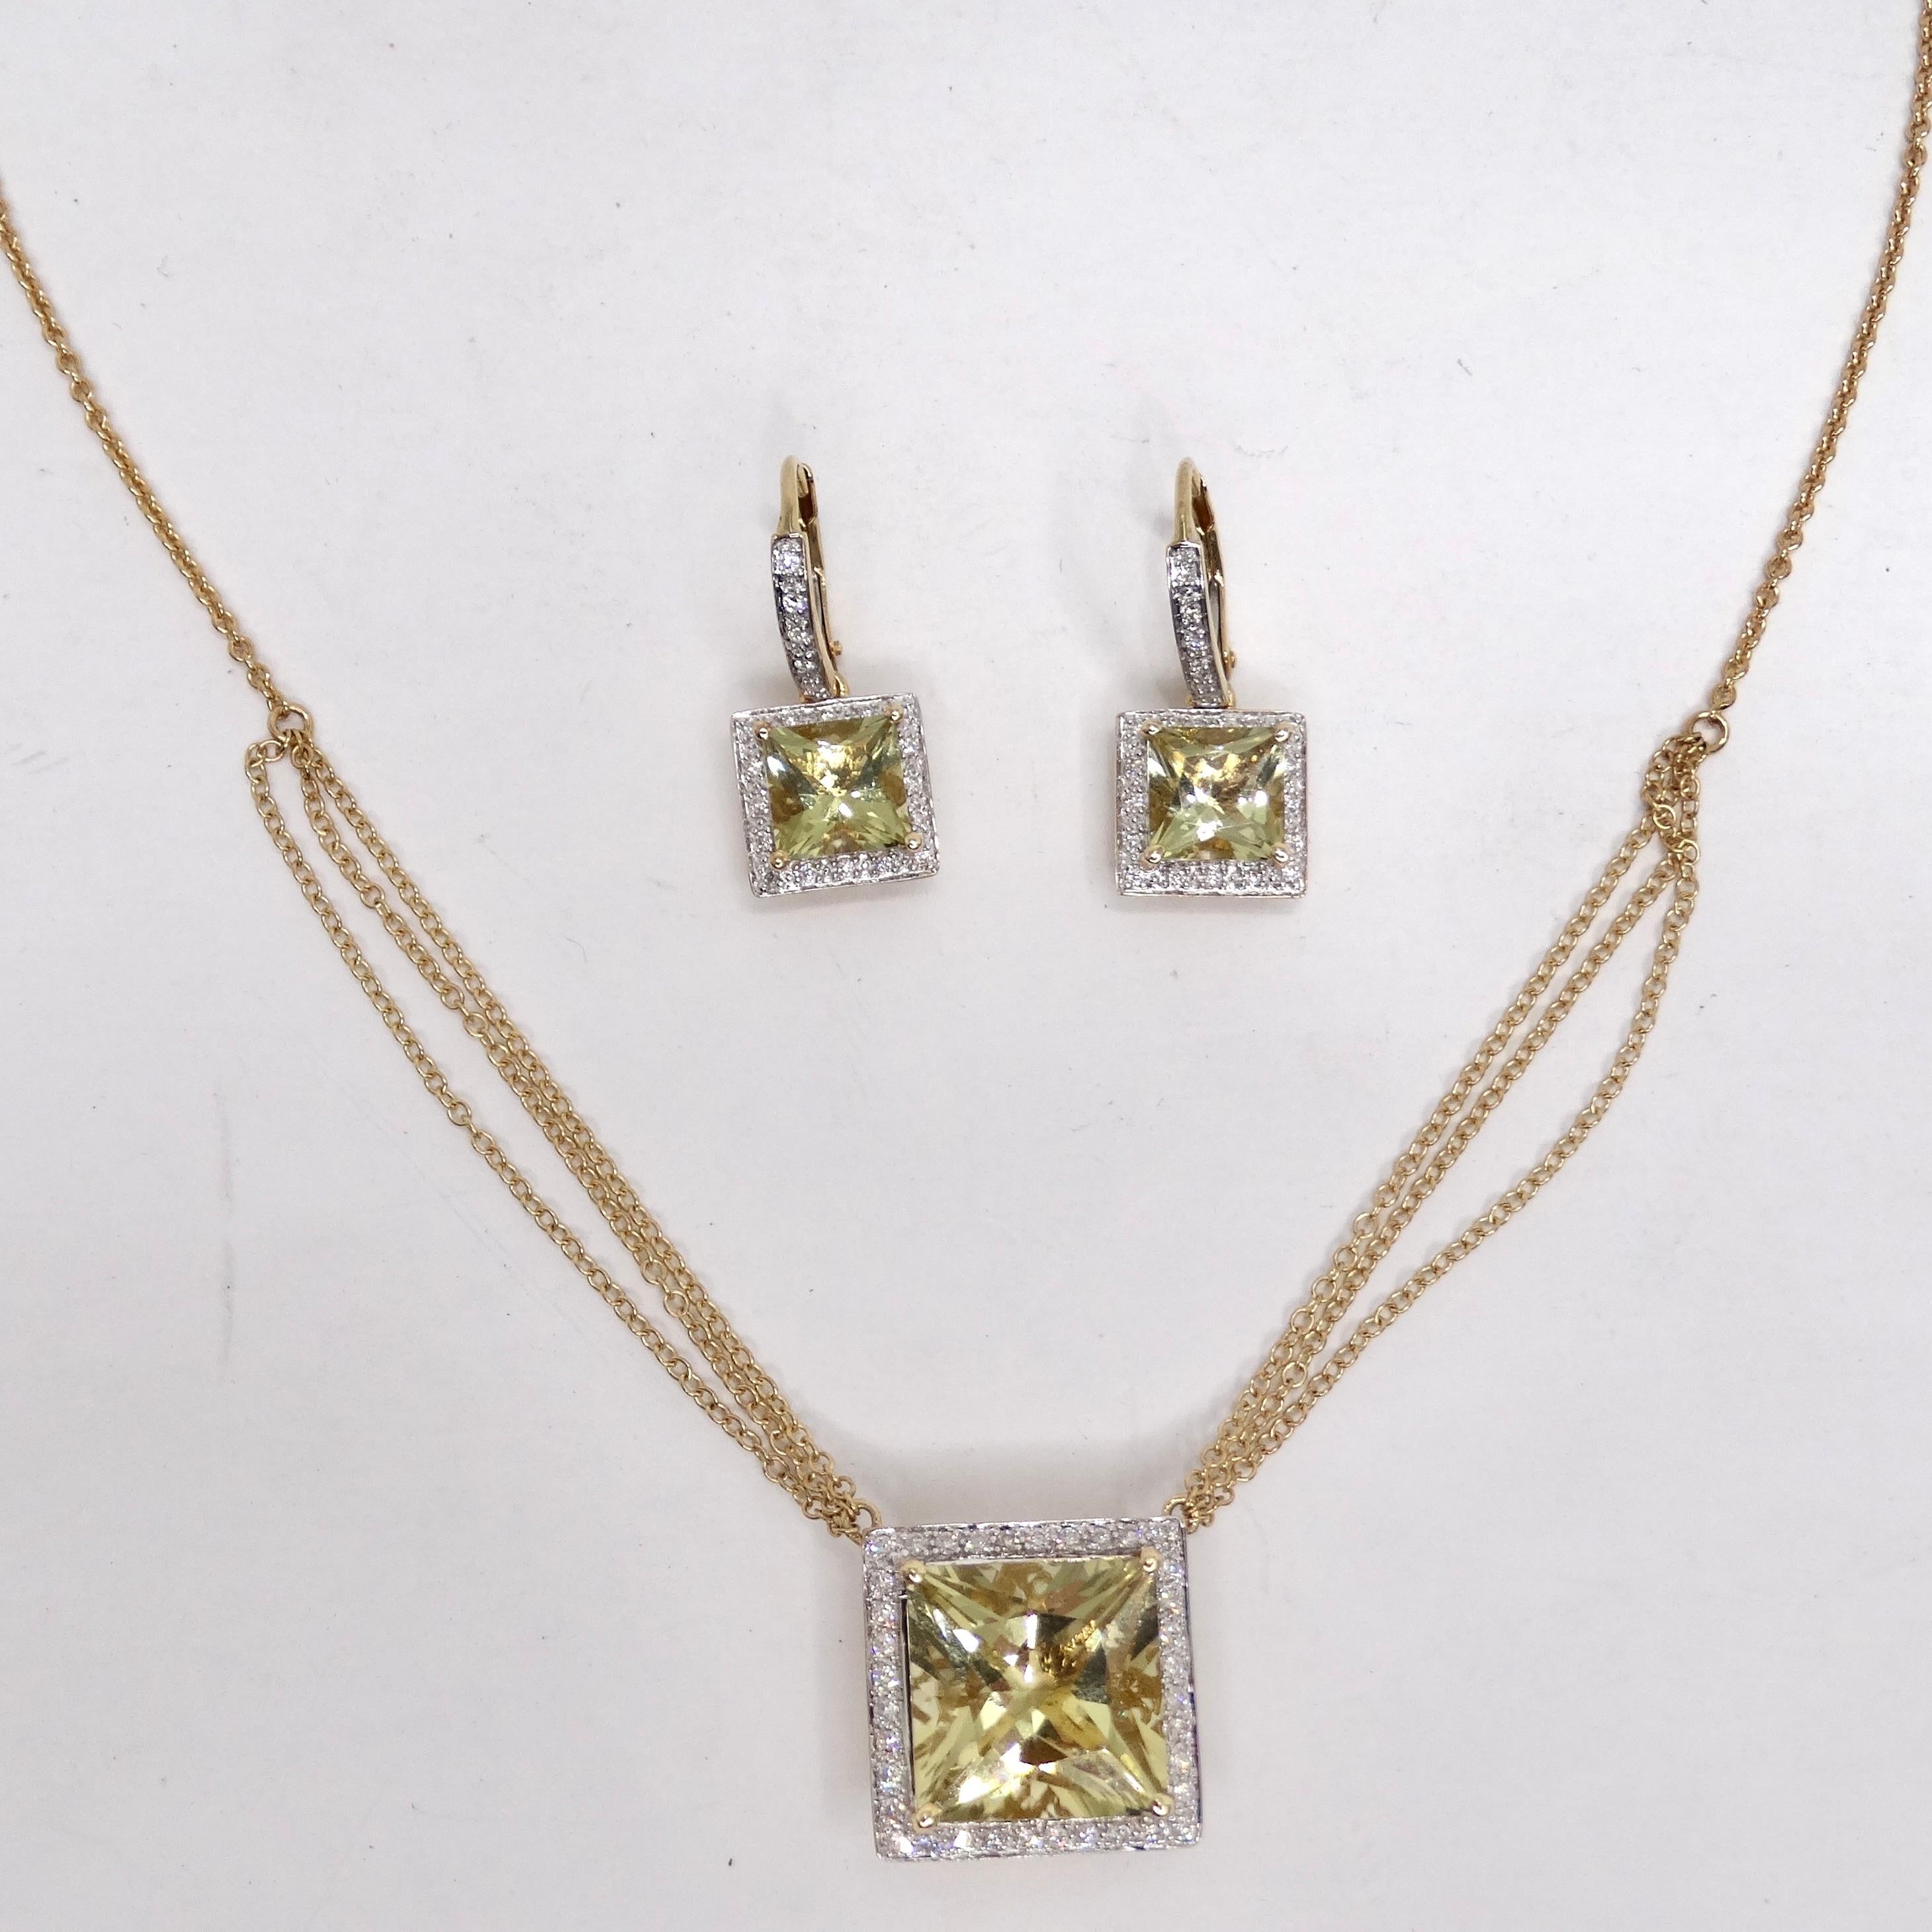 Discover Timeless Elegance with the 14K Gold Citrine Diamond Necklace and Earrings Set! This stunning necklace and earrings set is a harmonious combination of classic design, precious gemstones, and the subtle allure of the 1990s vintage era. It's a